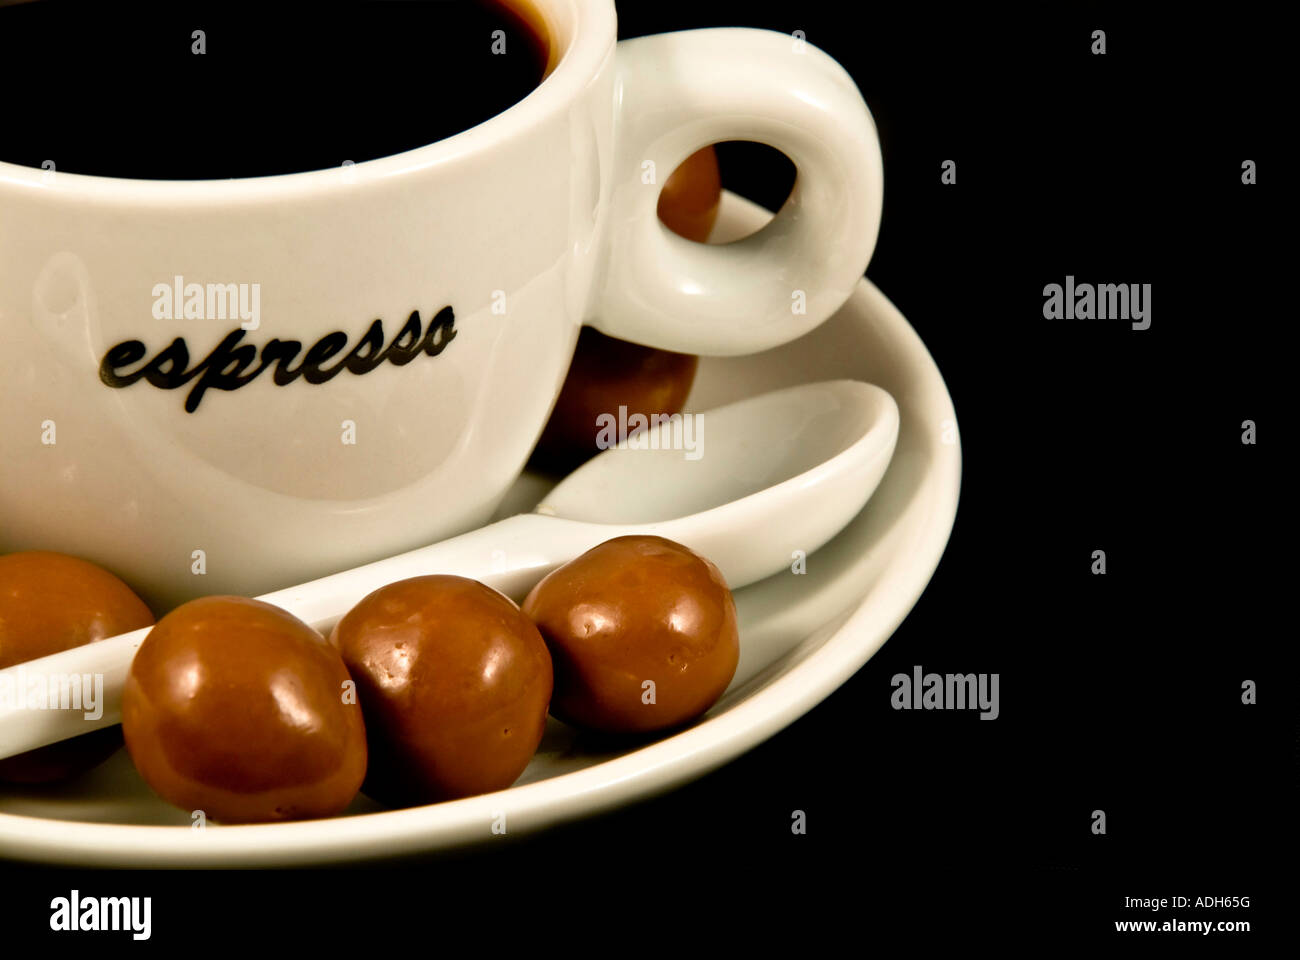 Cup of coffee espresso with sweeties. Stock Photo